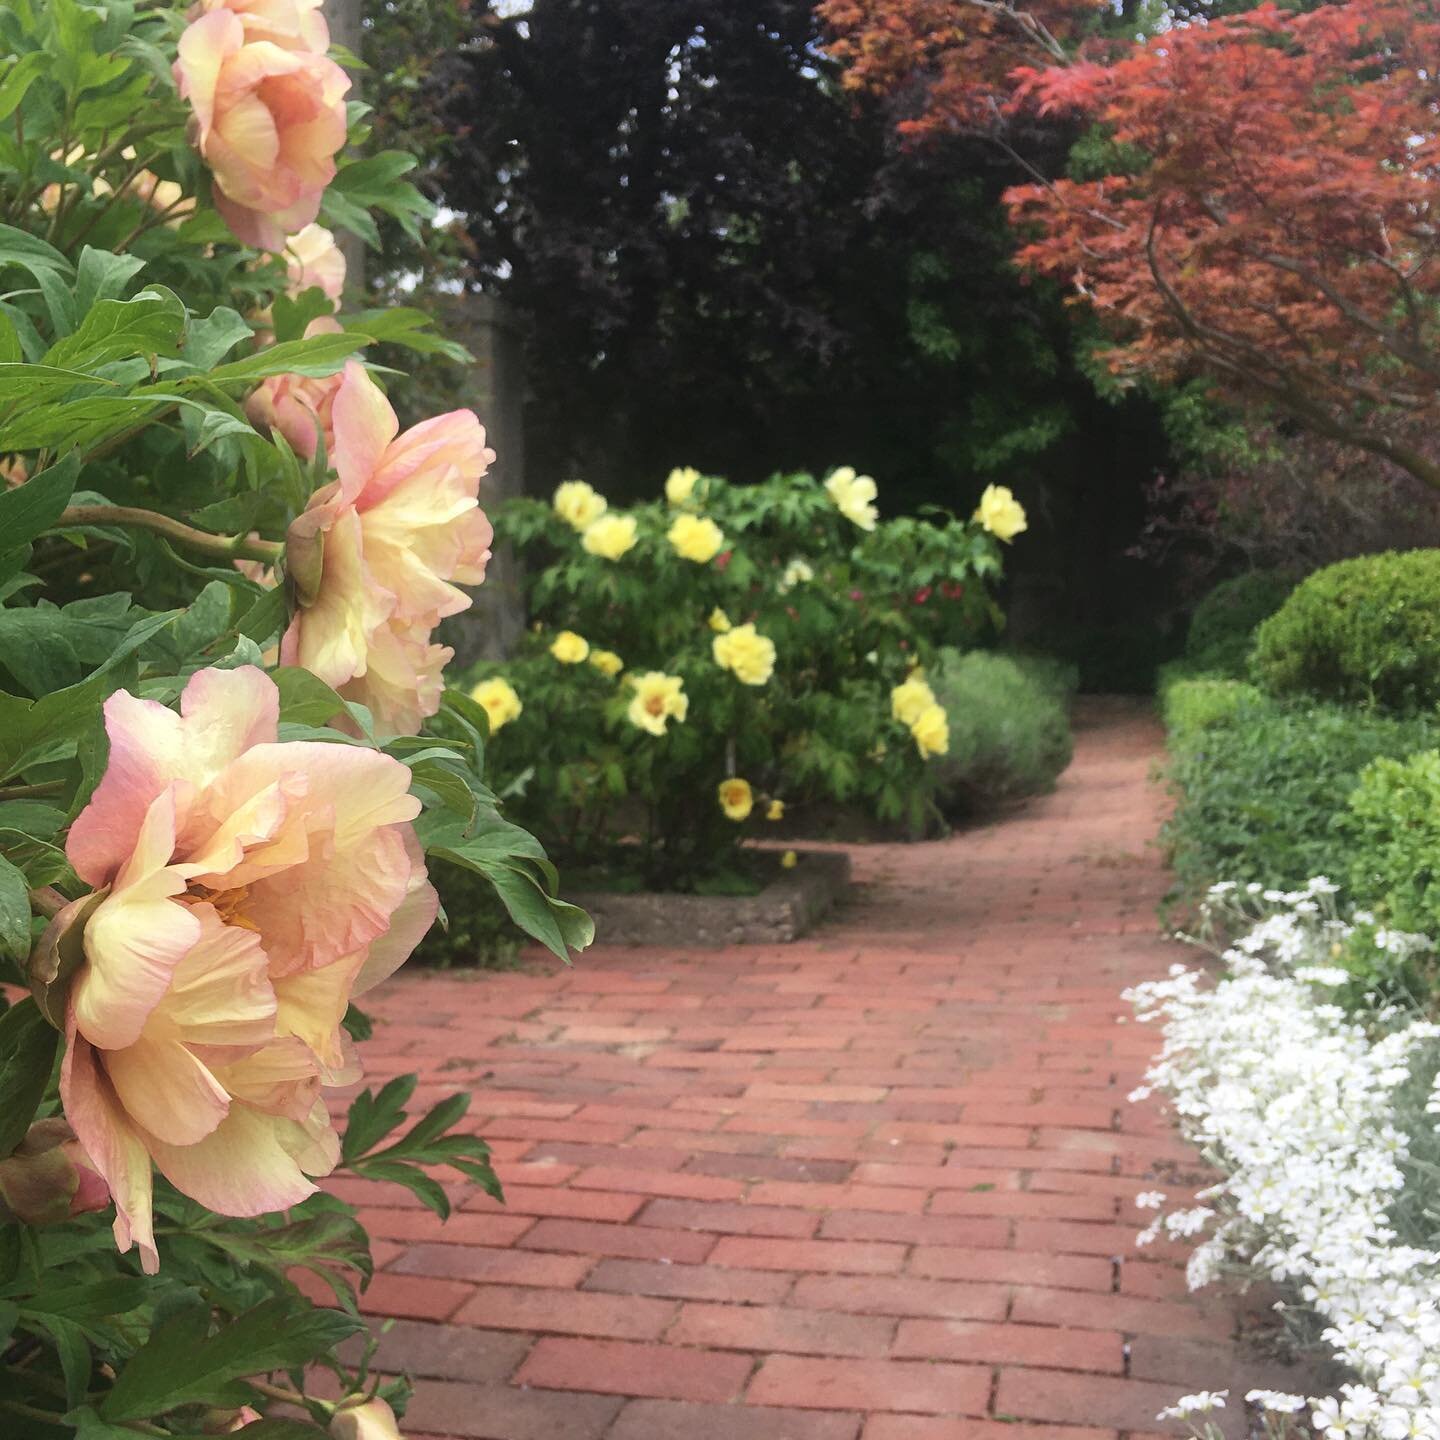 Just a handful of spots are available for the final Tree Peony Festival day this Sat, May 29!

If you can&rsquo;t visit that day, check out our scheduled Open Garden Days sprinkled through June and July! Reservations are required - see our website li